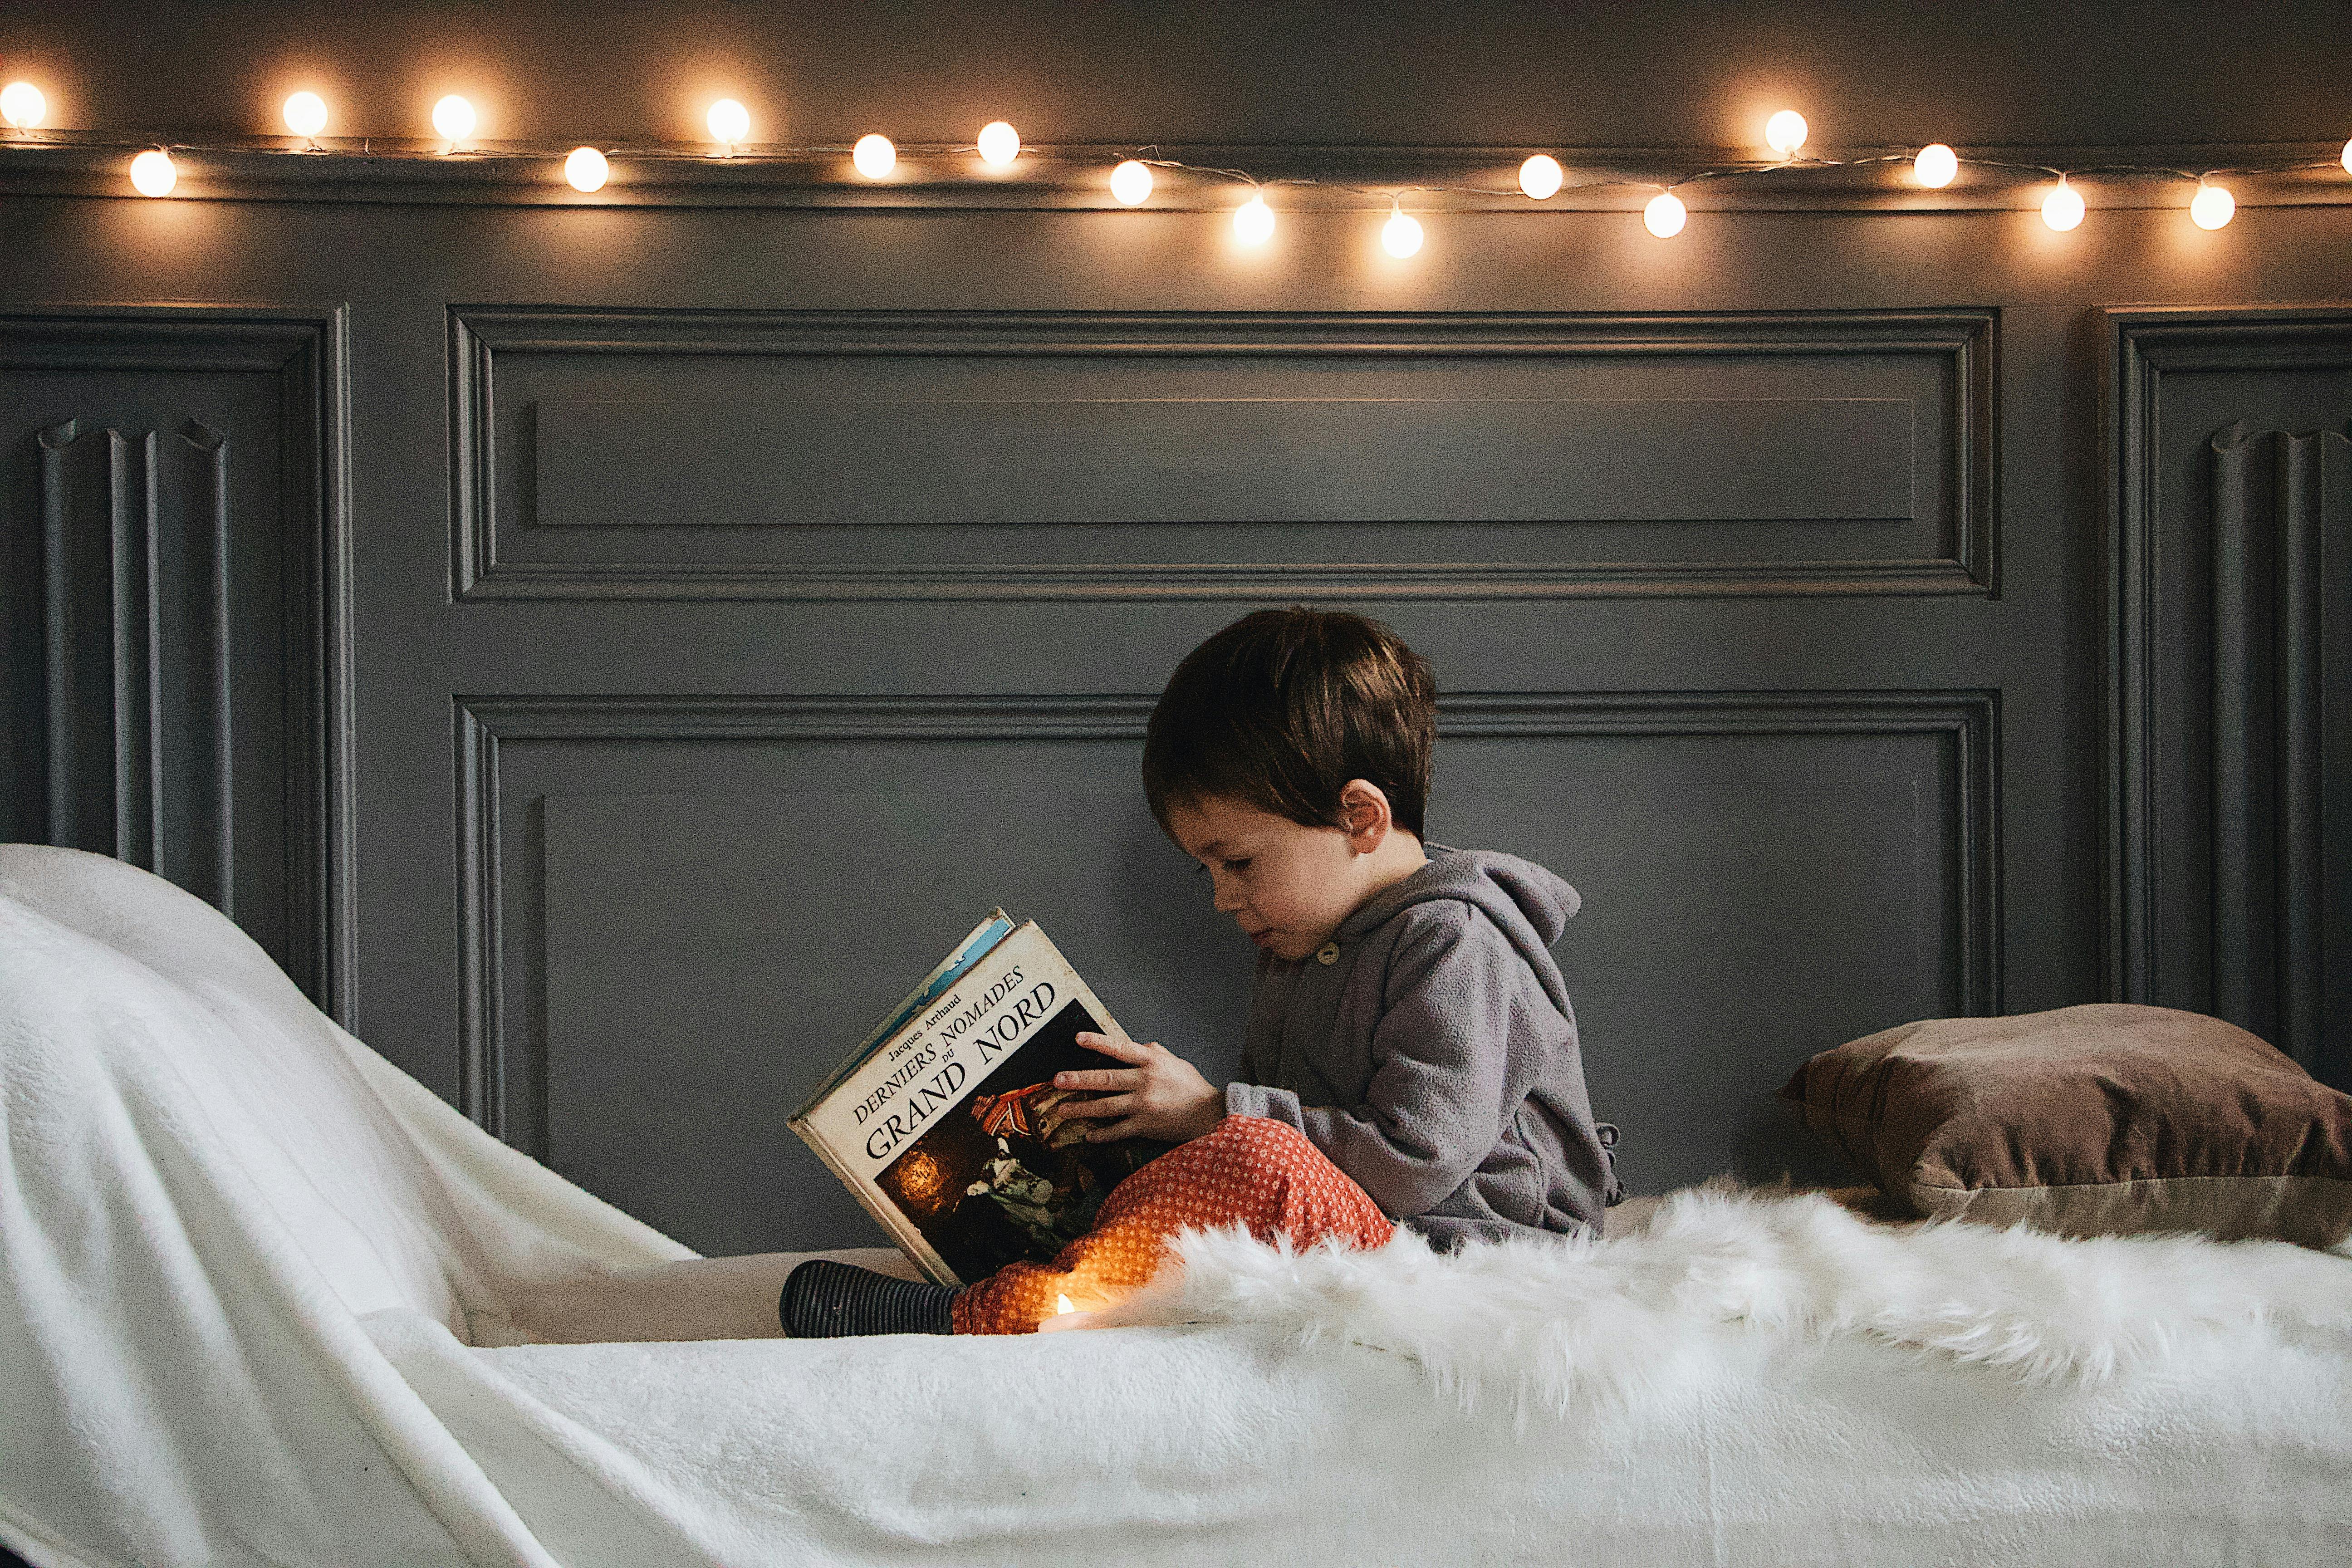 A small boy reading a book in bed | Source: Pexels